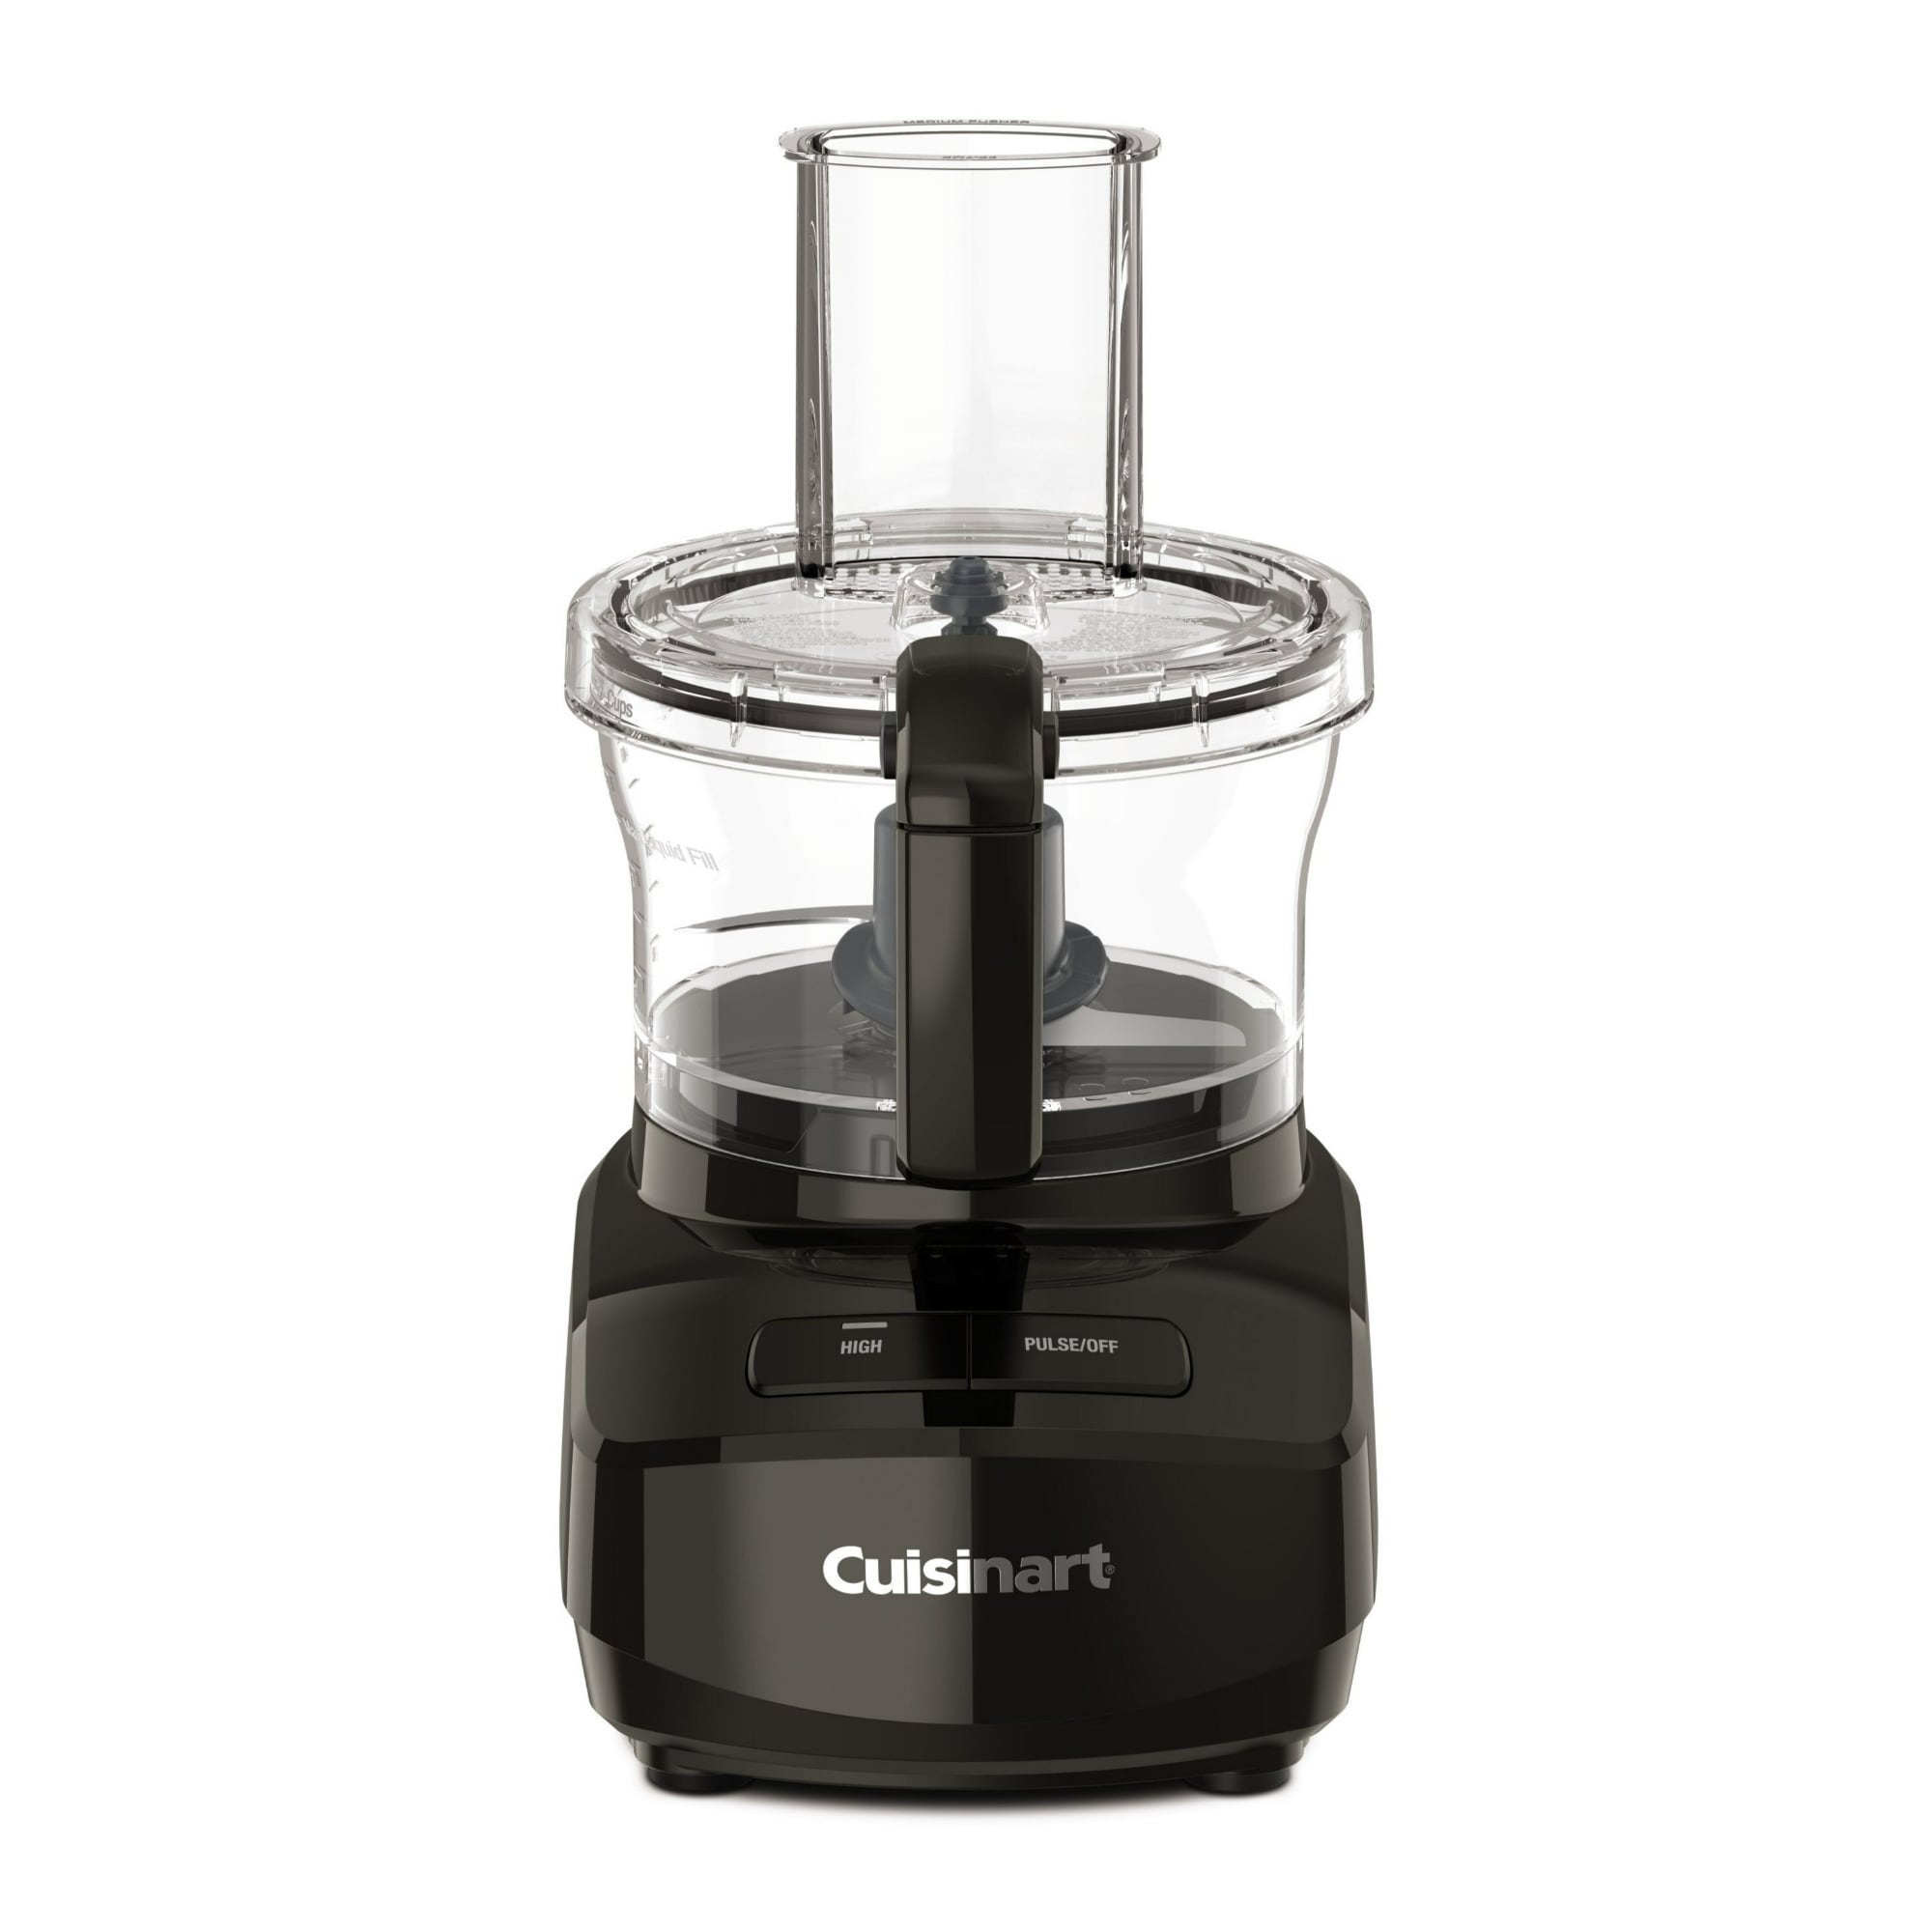 Cuisinart 11 Cups-Watt Brushed Stainless Steel Food Processor at